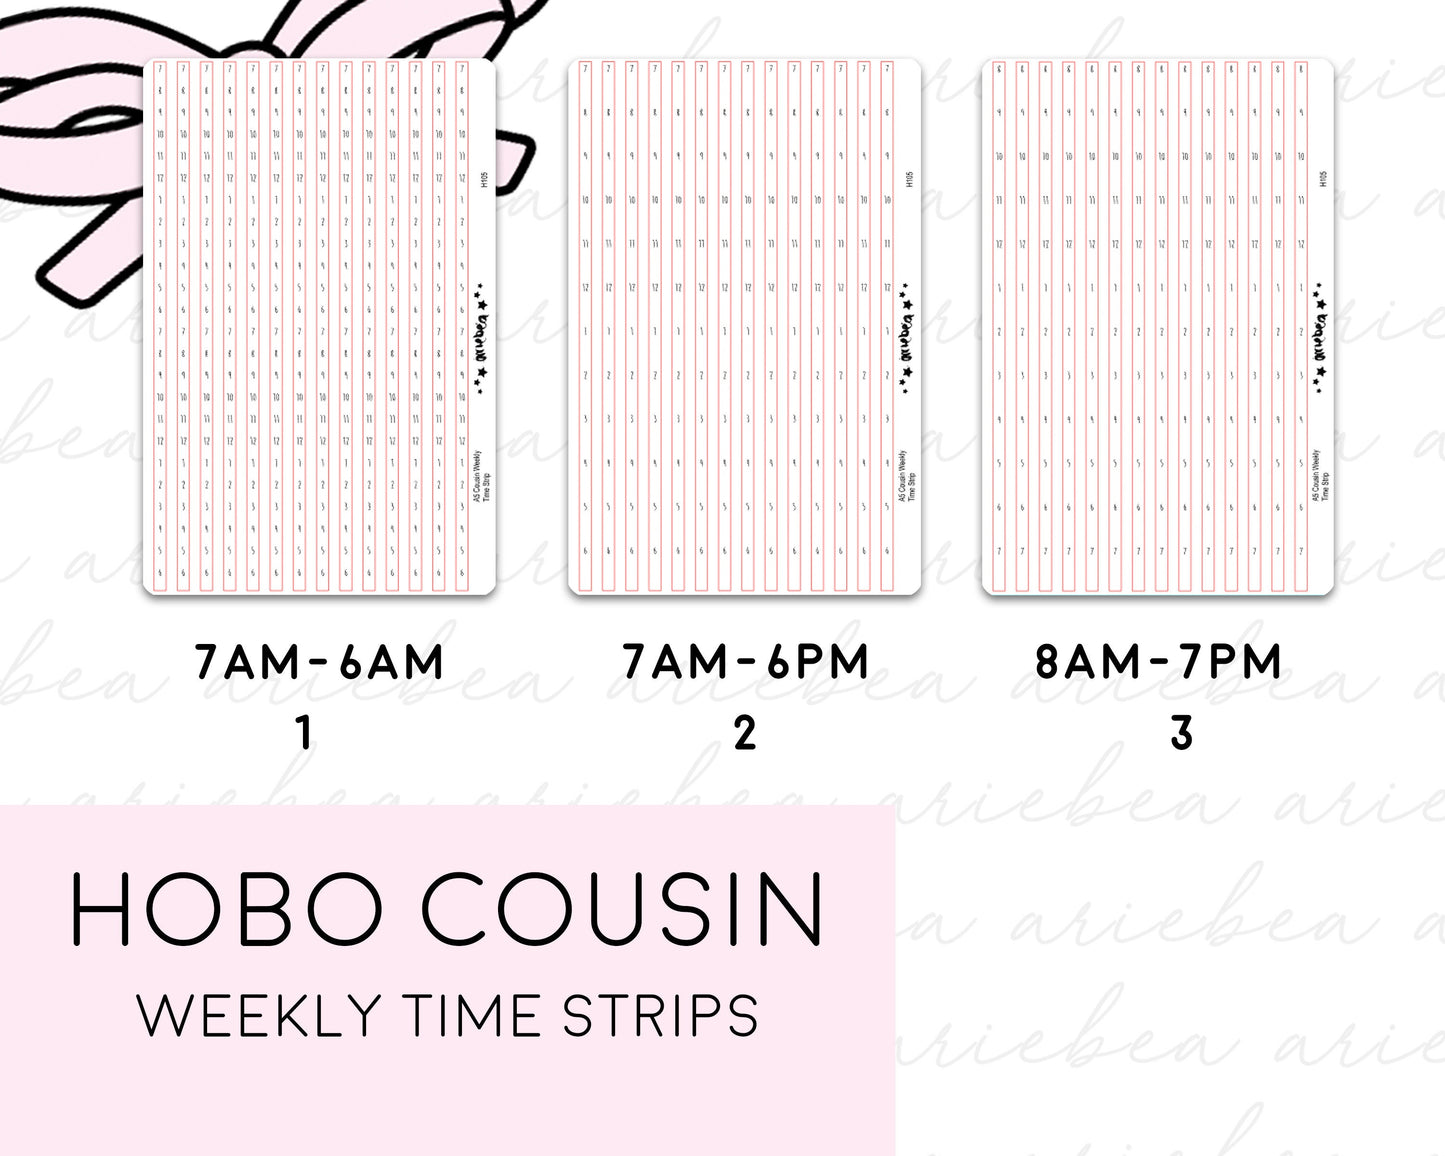 Hobonichi Cousin Weekly Time Strips Planner Stickers